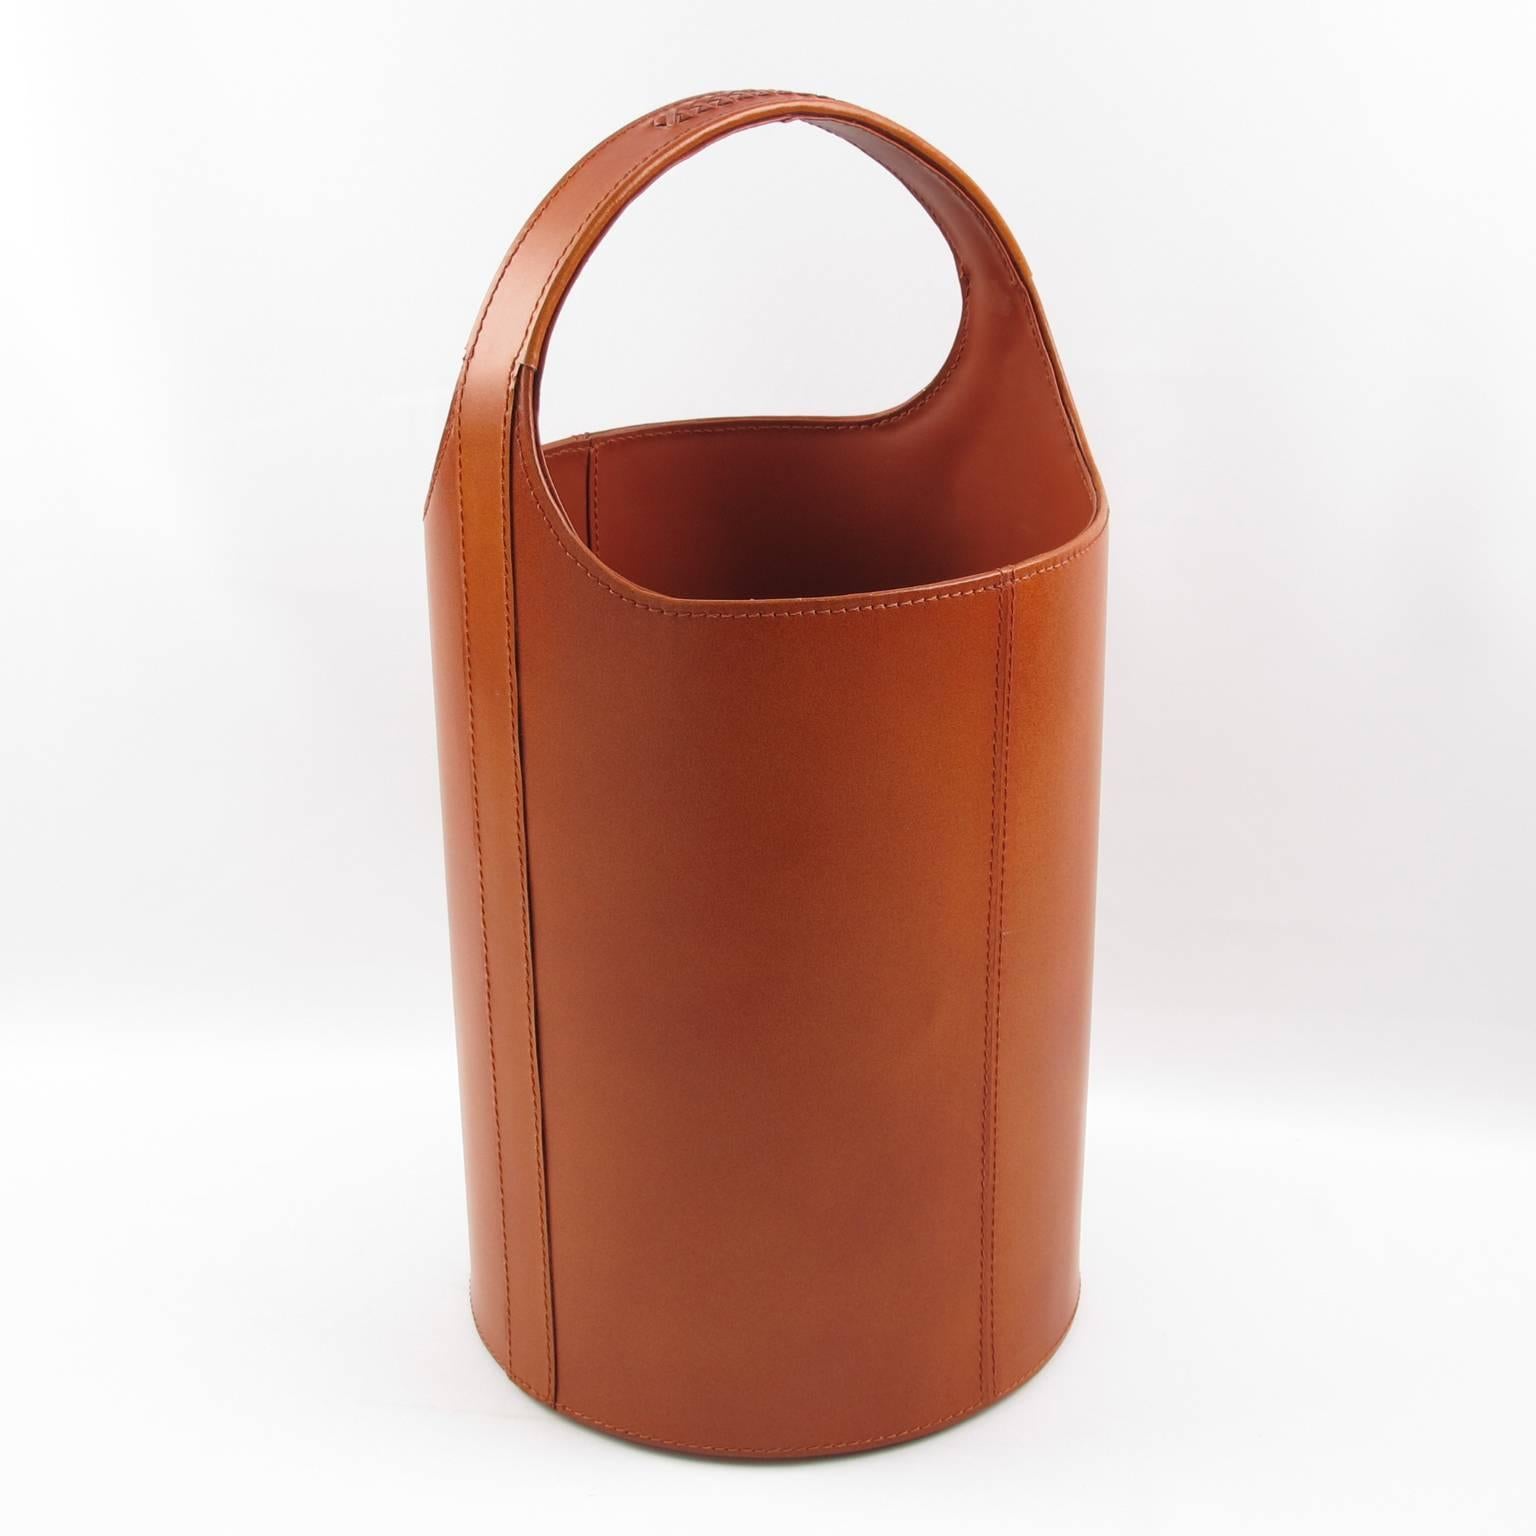 Elegant waste paper basket manufactured around 1960s in France. Large shape for extra body and stability. Made in cognac color leather imitation with assorted color stitching and braided design on handle. Excellent vintage